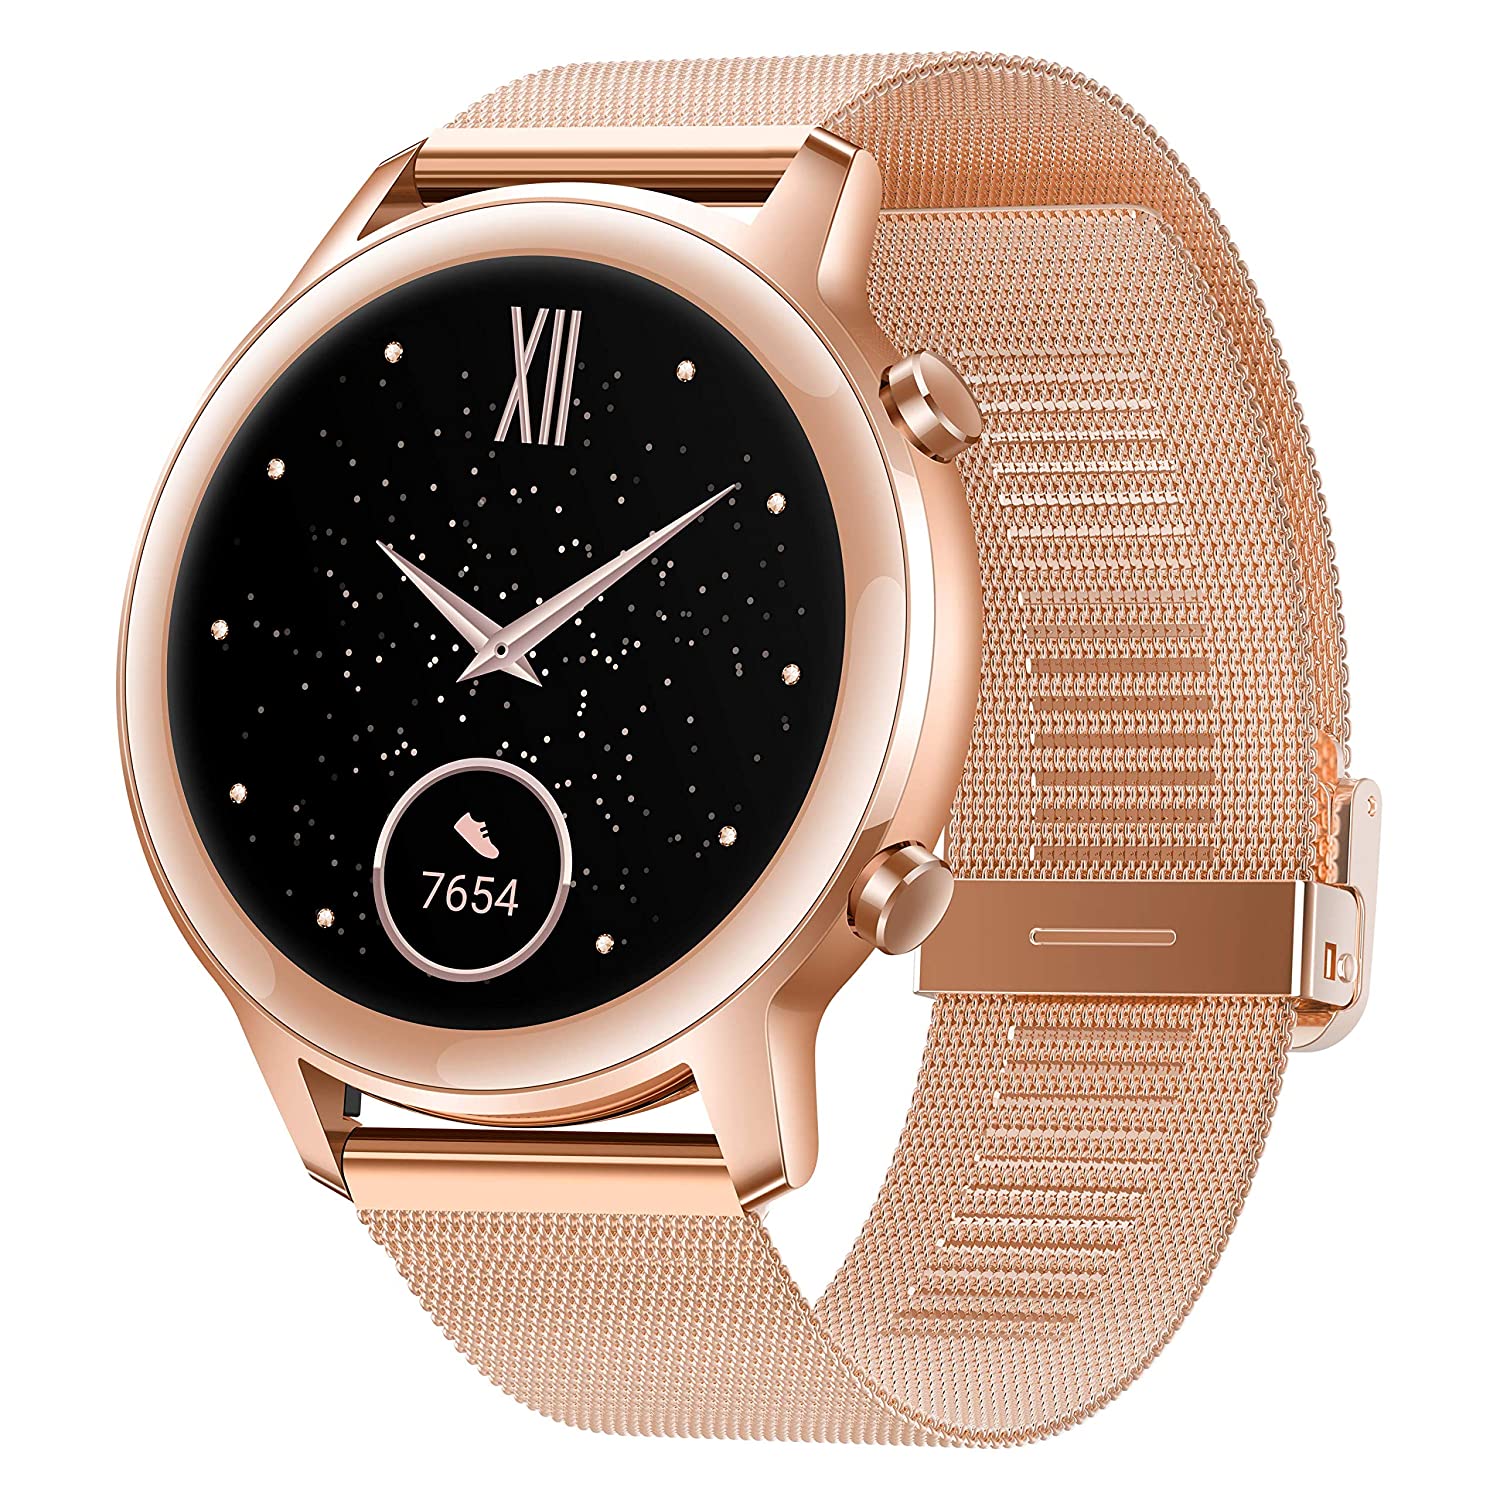 HONOR Magic Watch 2 smaller version 42 mm, Sakura Gold -the best budget smartwatch if your budget is under 10,000